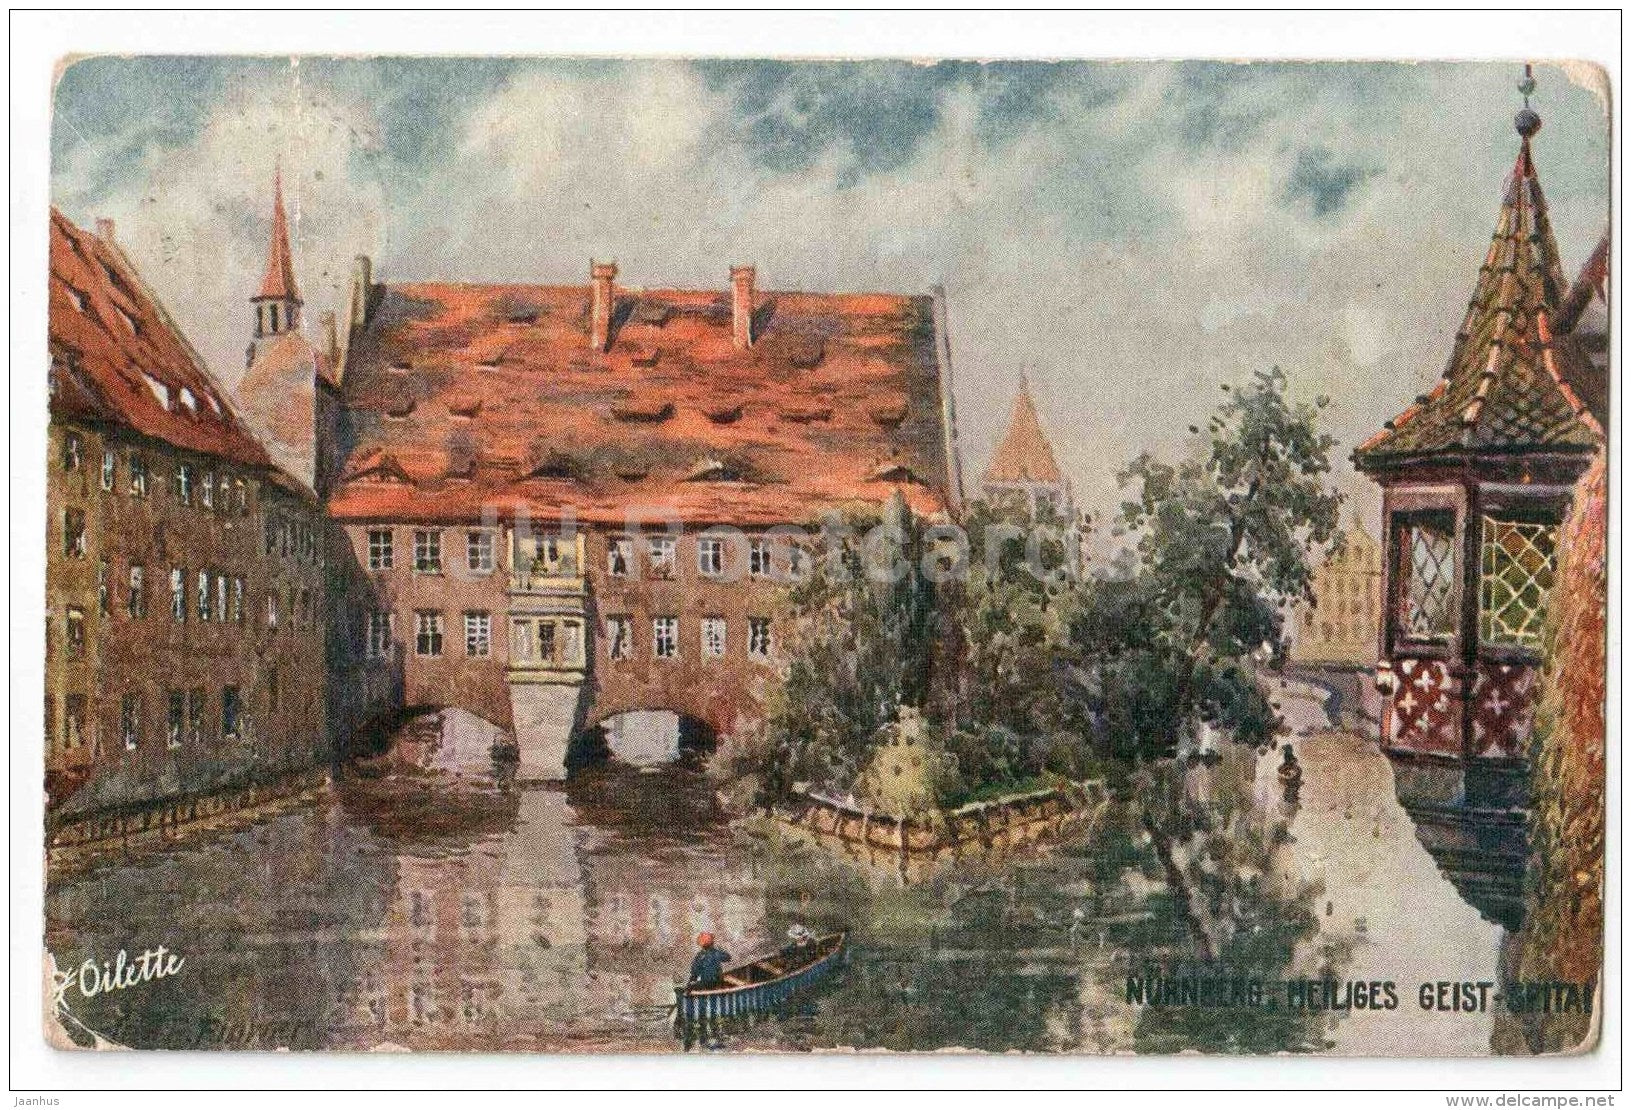 Heiliges Geist Spital - The Hospital of the Holy Ghost - Nürnberg - Nuerenberg - Germany - sent to Estonia 1915 - JH Postcards